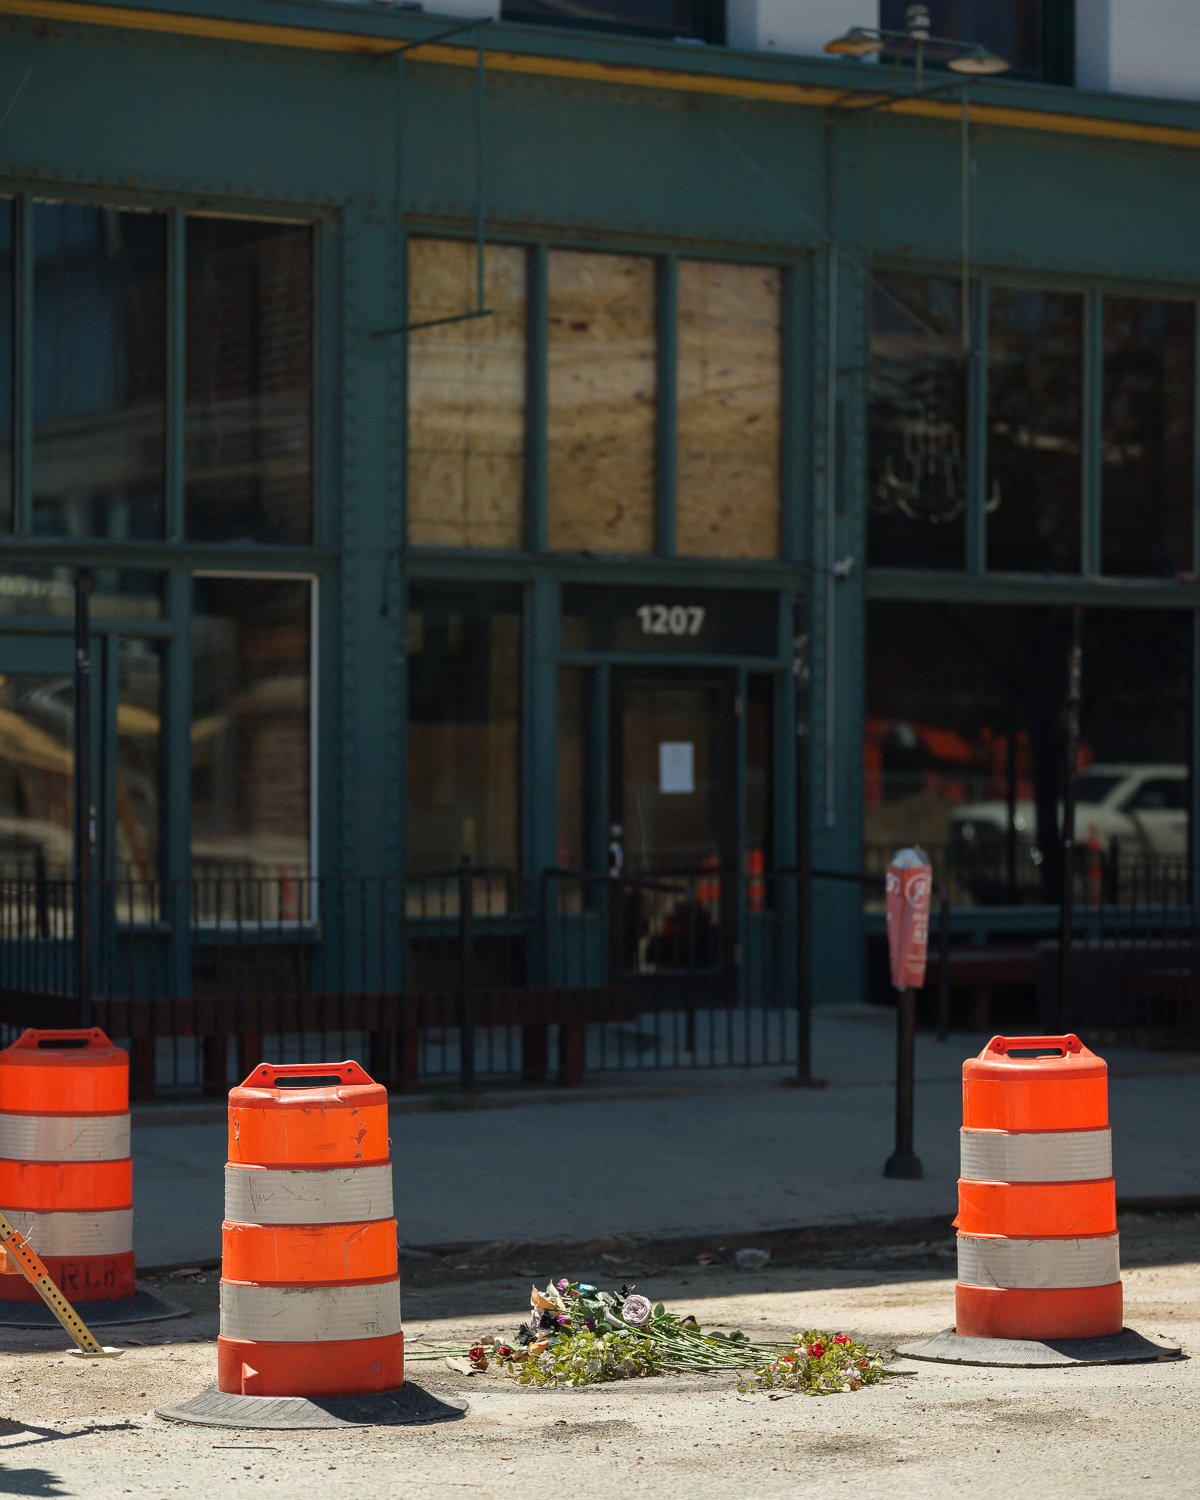  Flowers left as a memorial to James Scurlock in the location where he was killed in the Old Market District, Omaha, NE, for The New York Times, 2020 